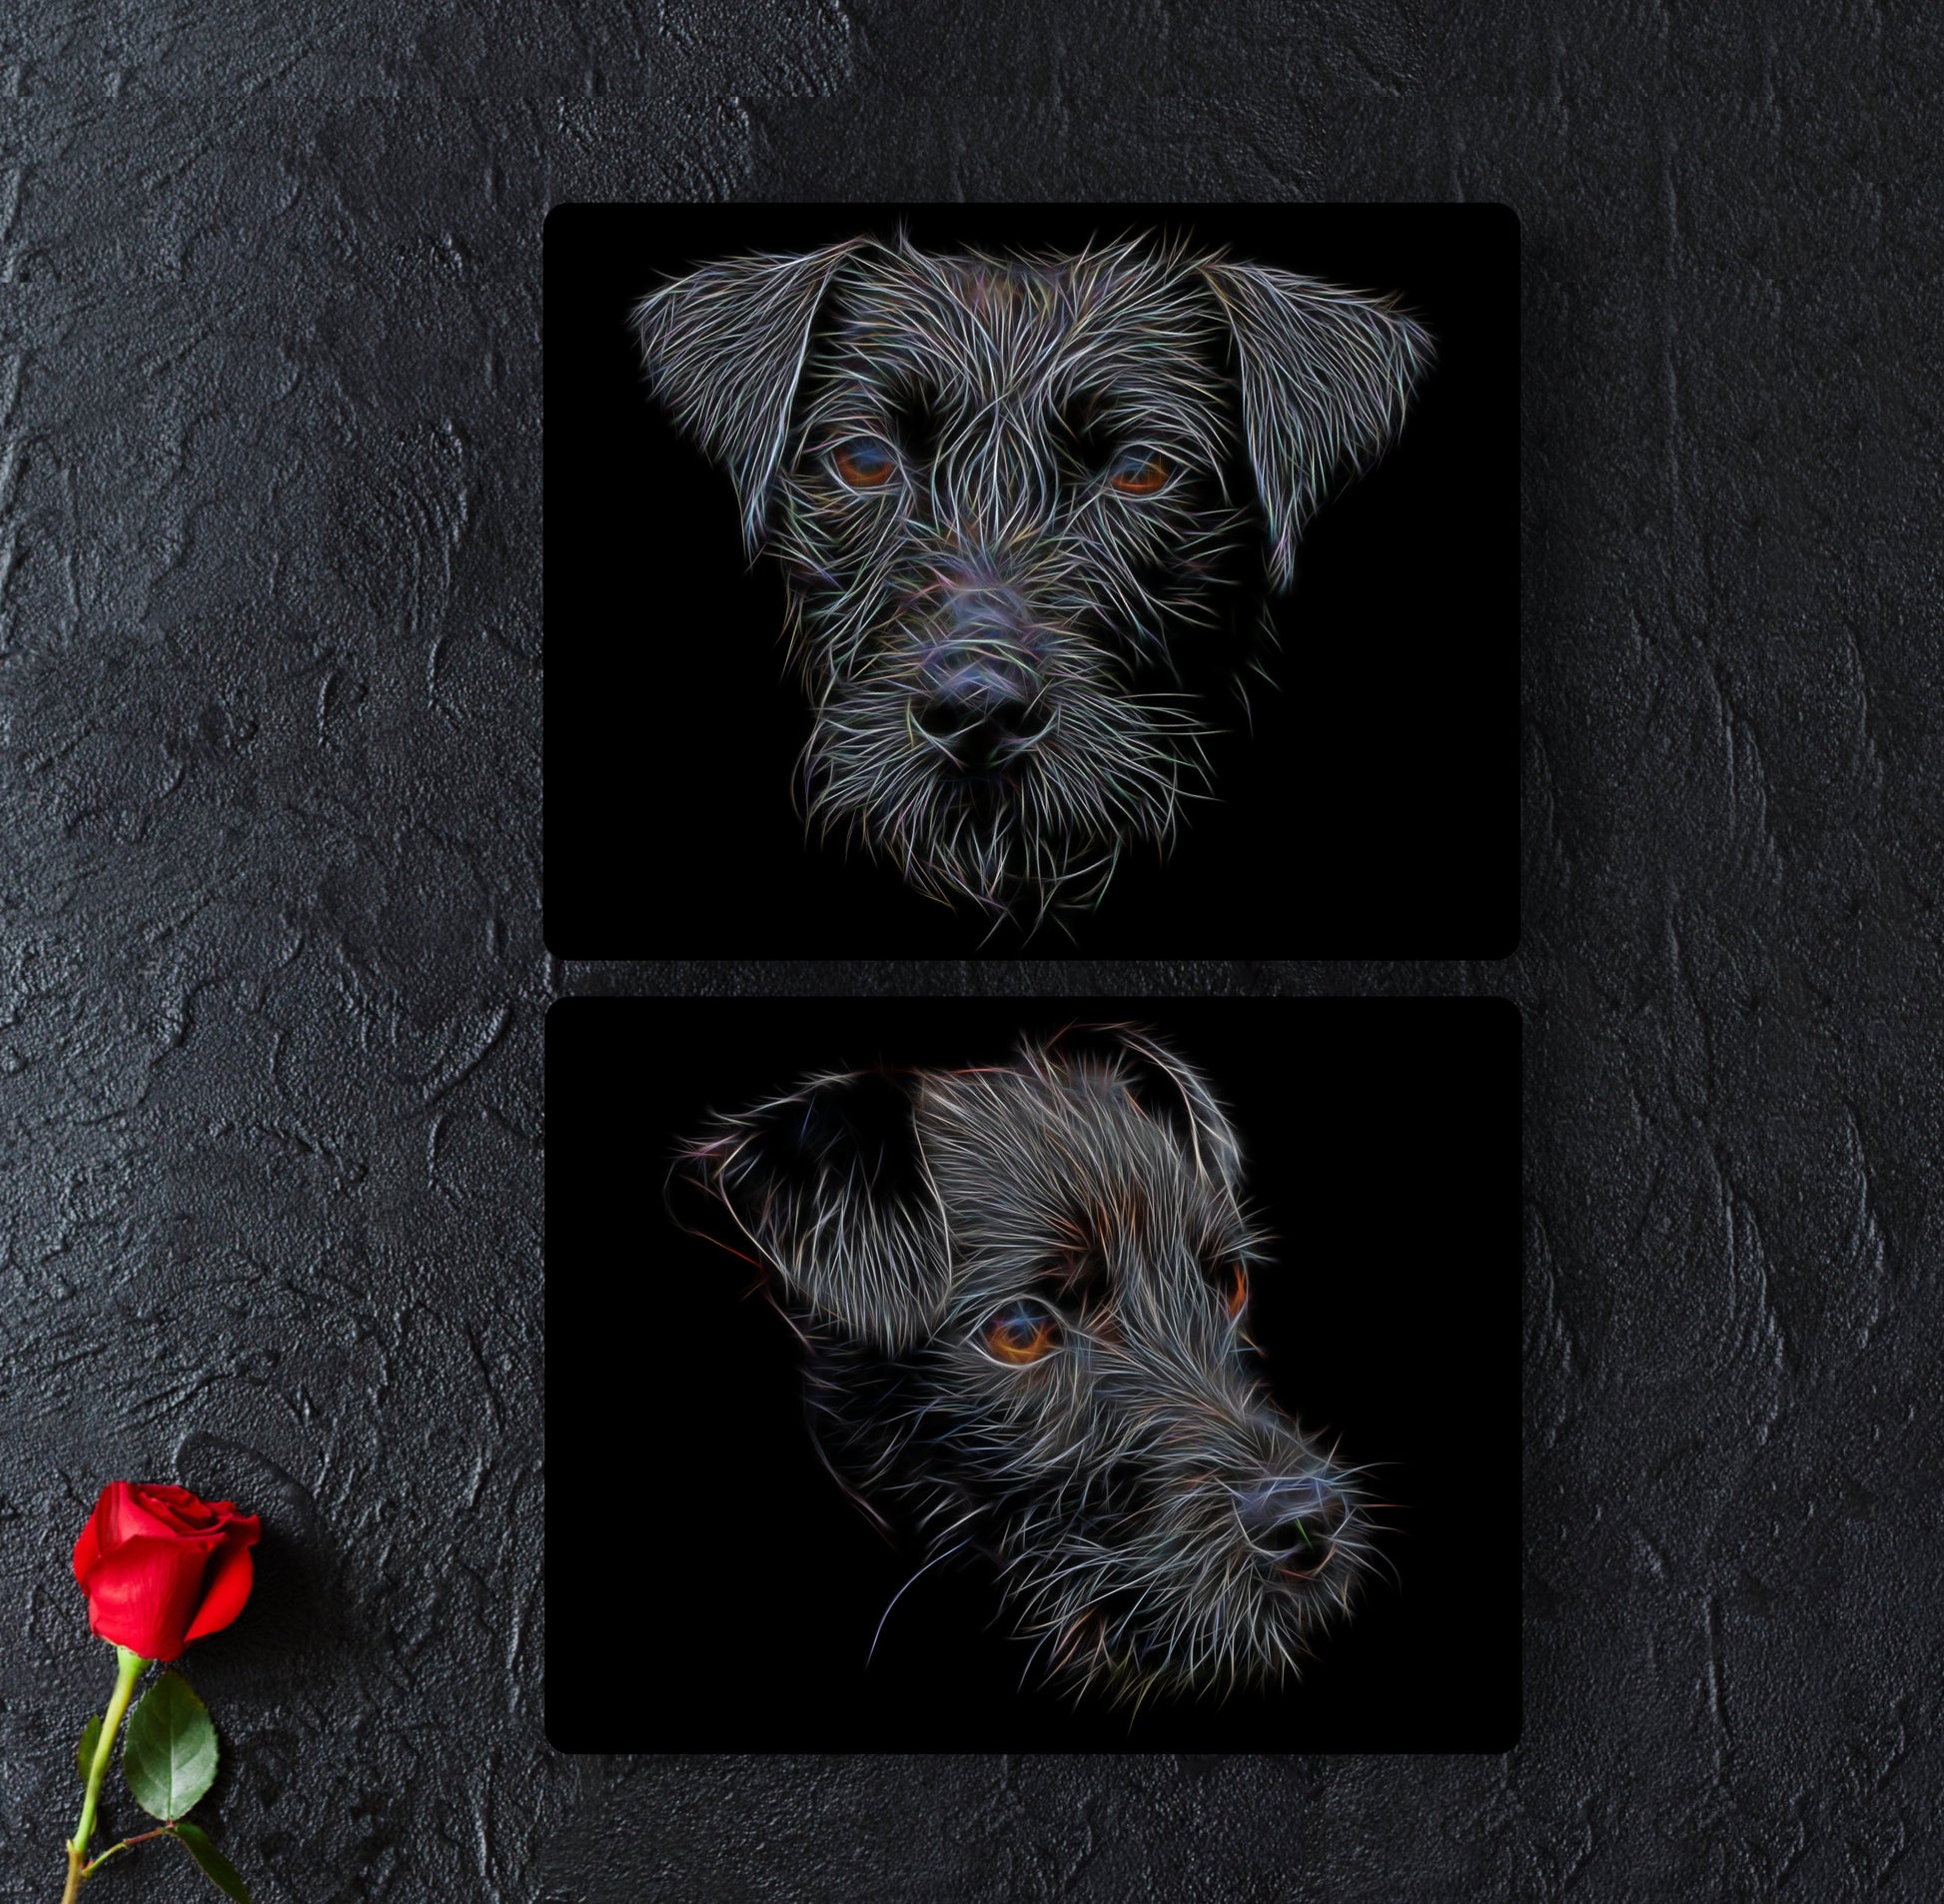 Patterdale Terrier Metal Wall Plaque with Stunning Fractal Art Design. Perfect Gift for Dog Owner.